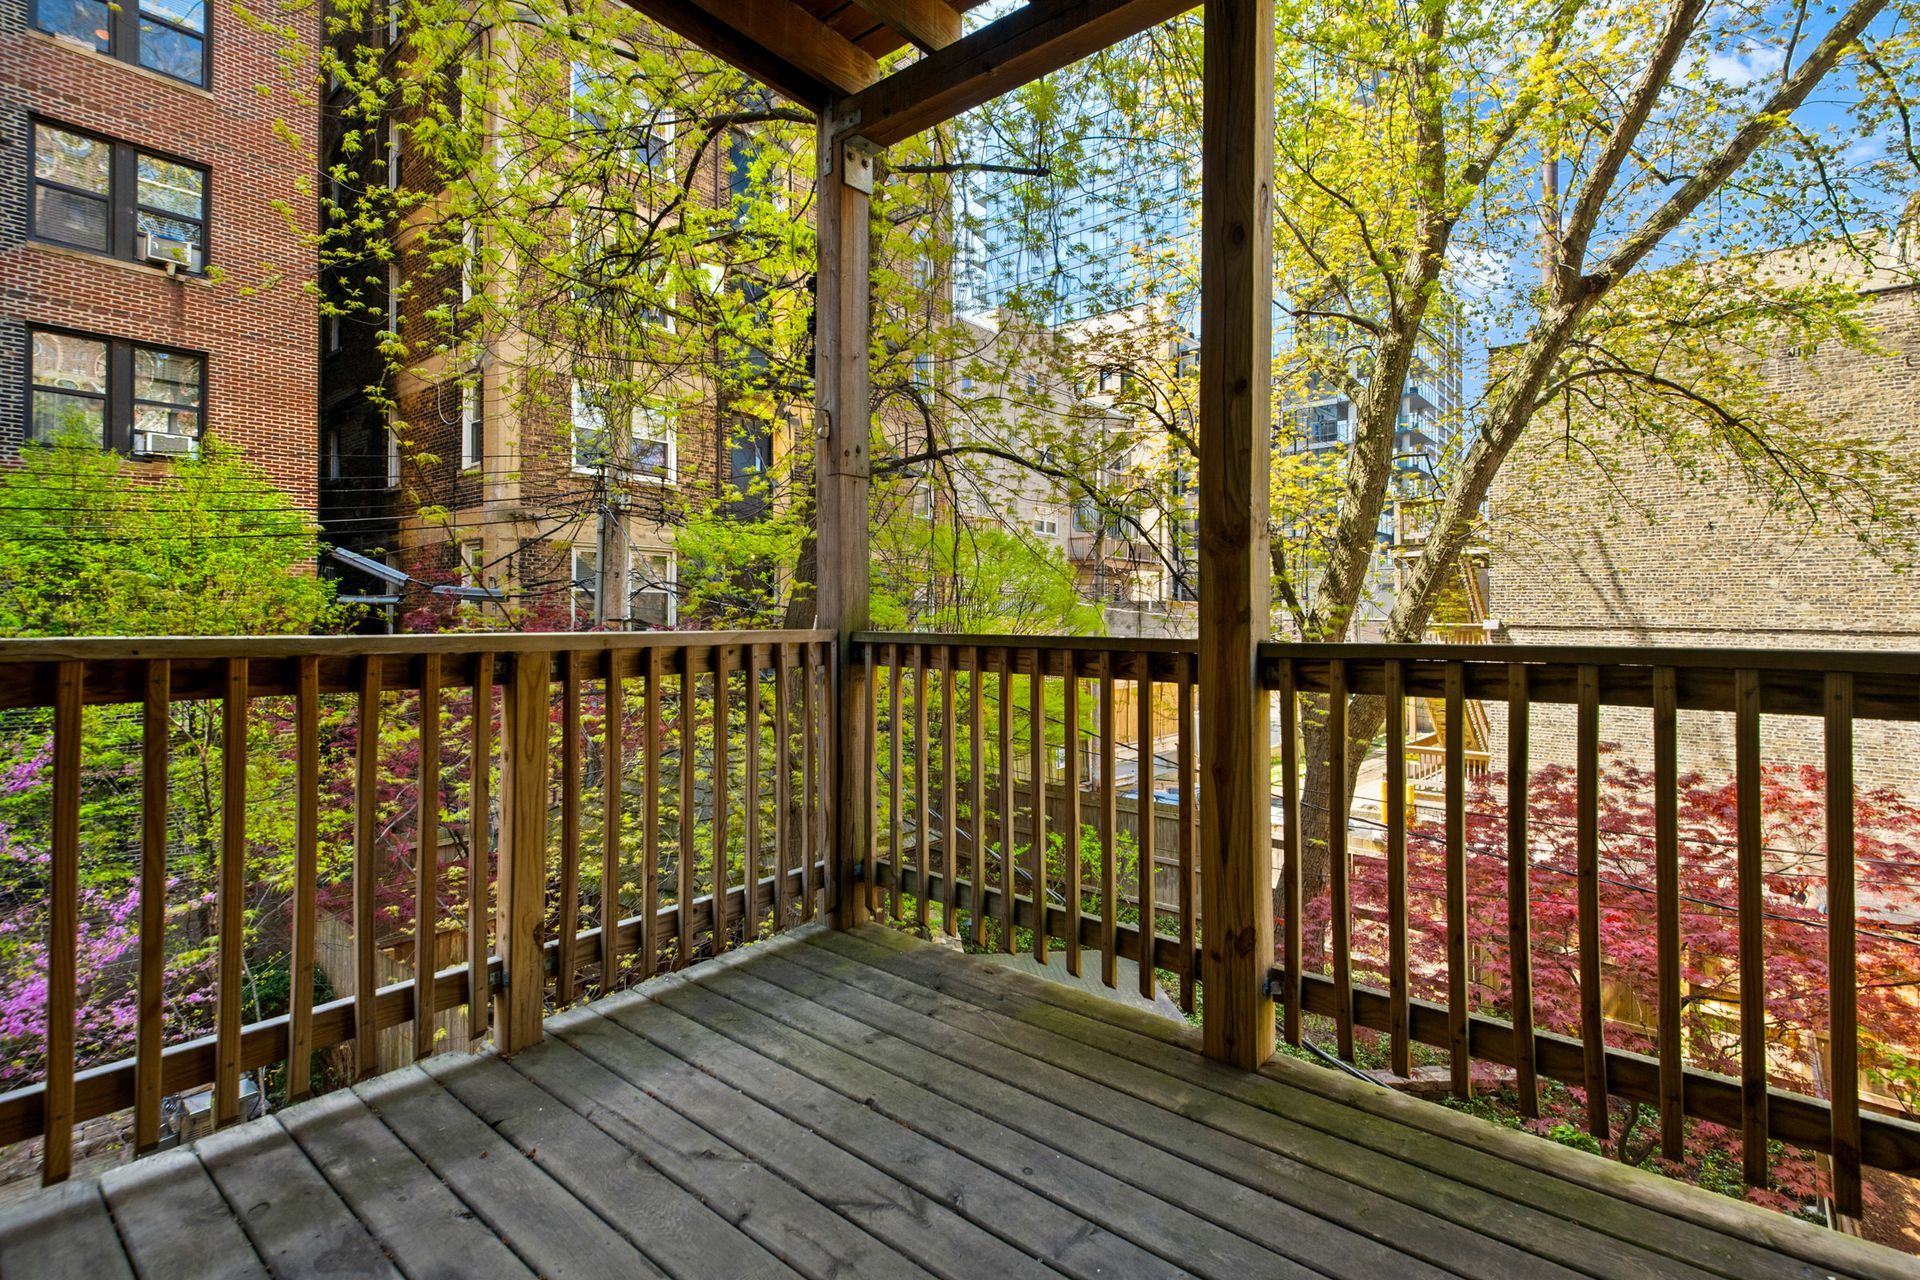 An empty porch with a wooden railing and trees in the background.